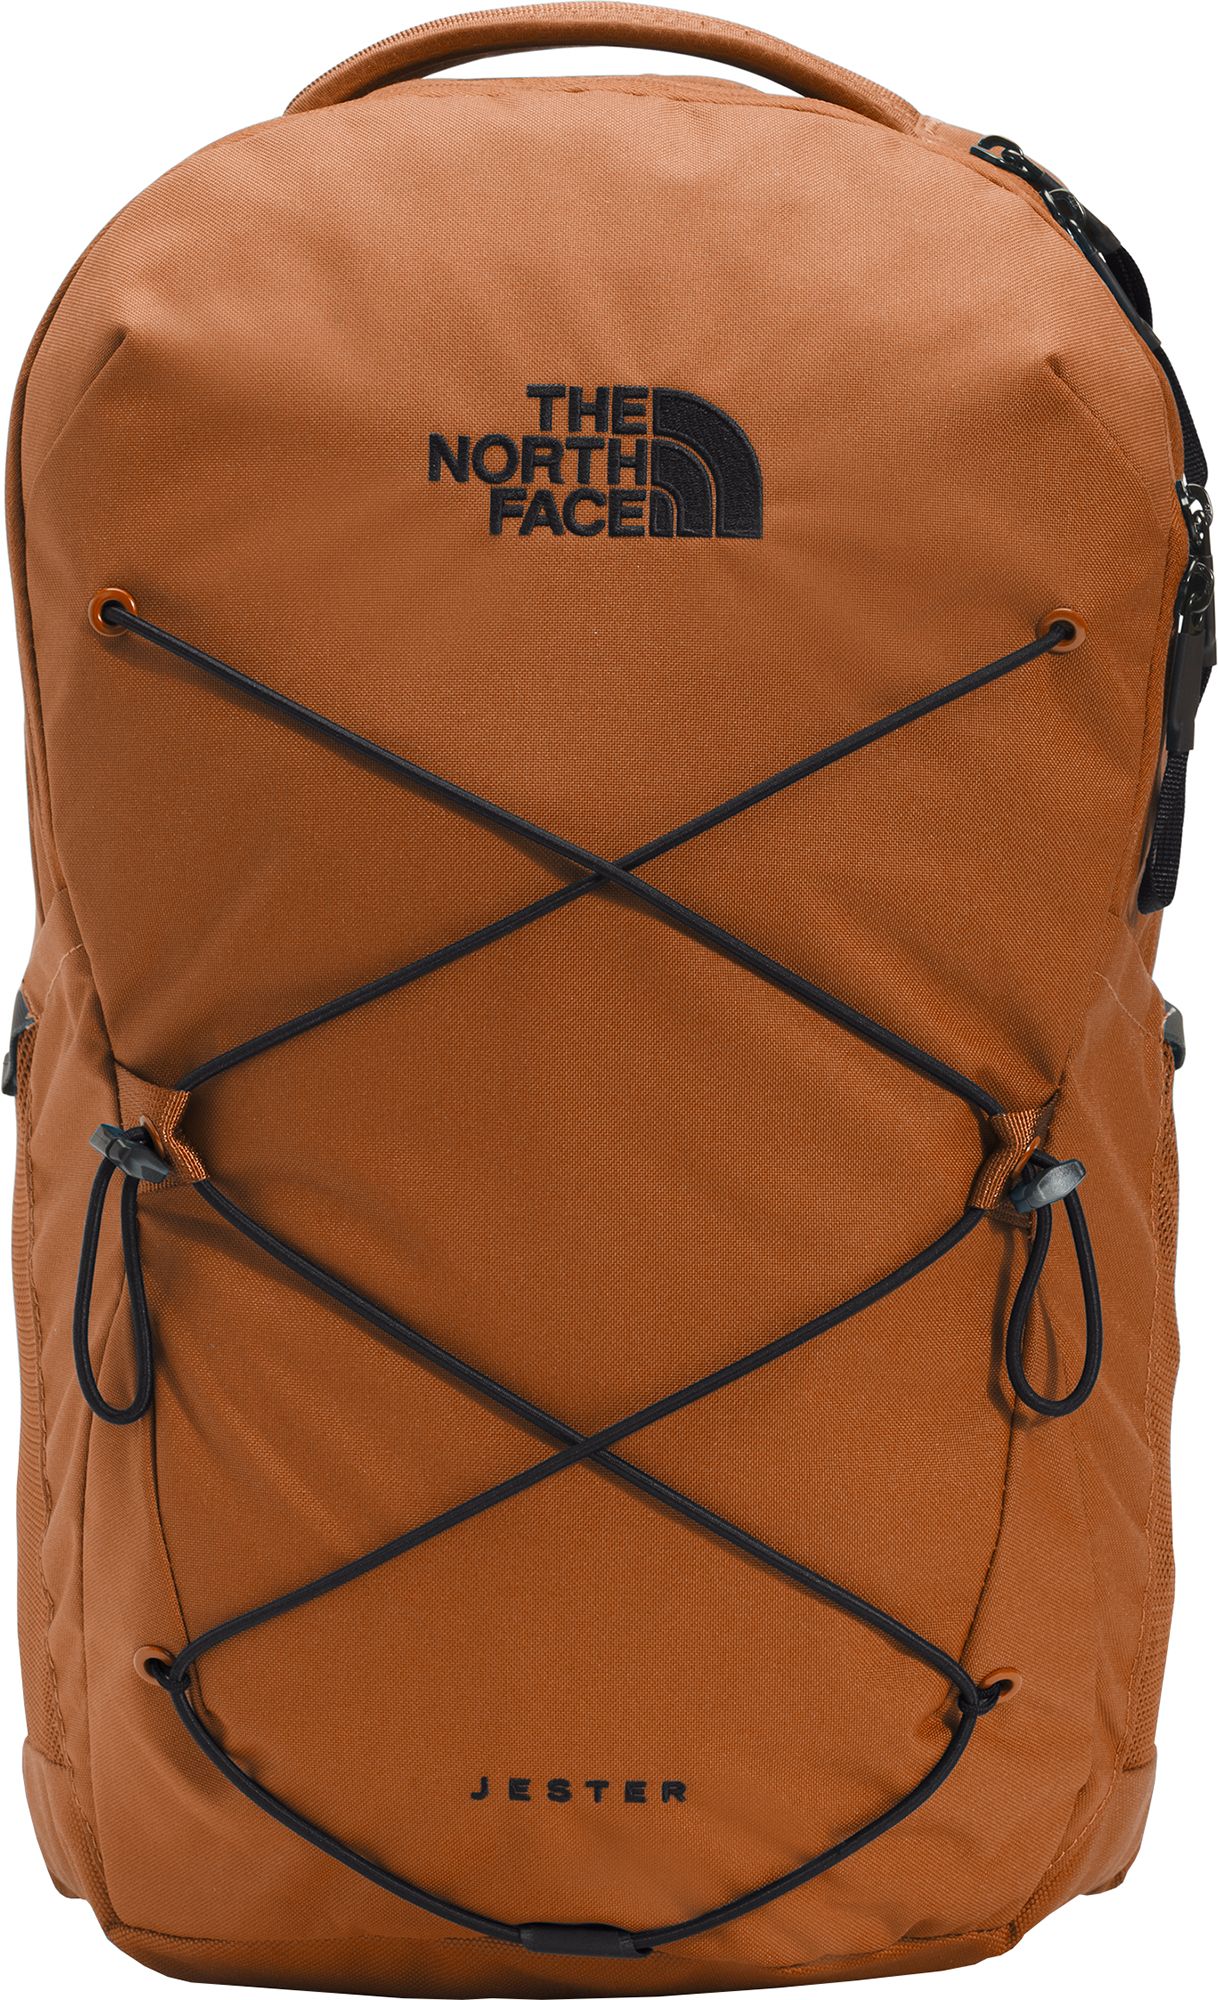 The North Face Mens Jester Backpack